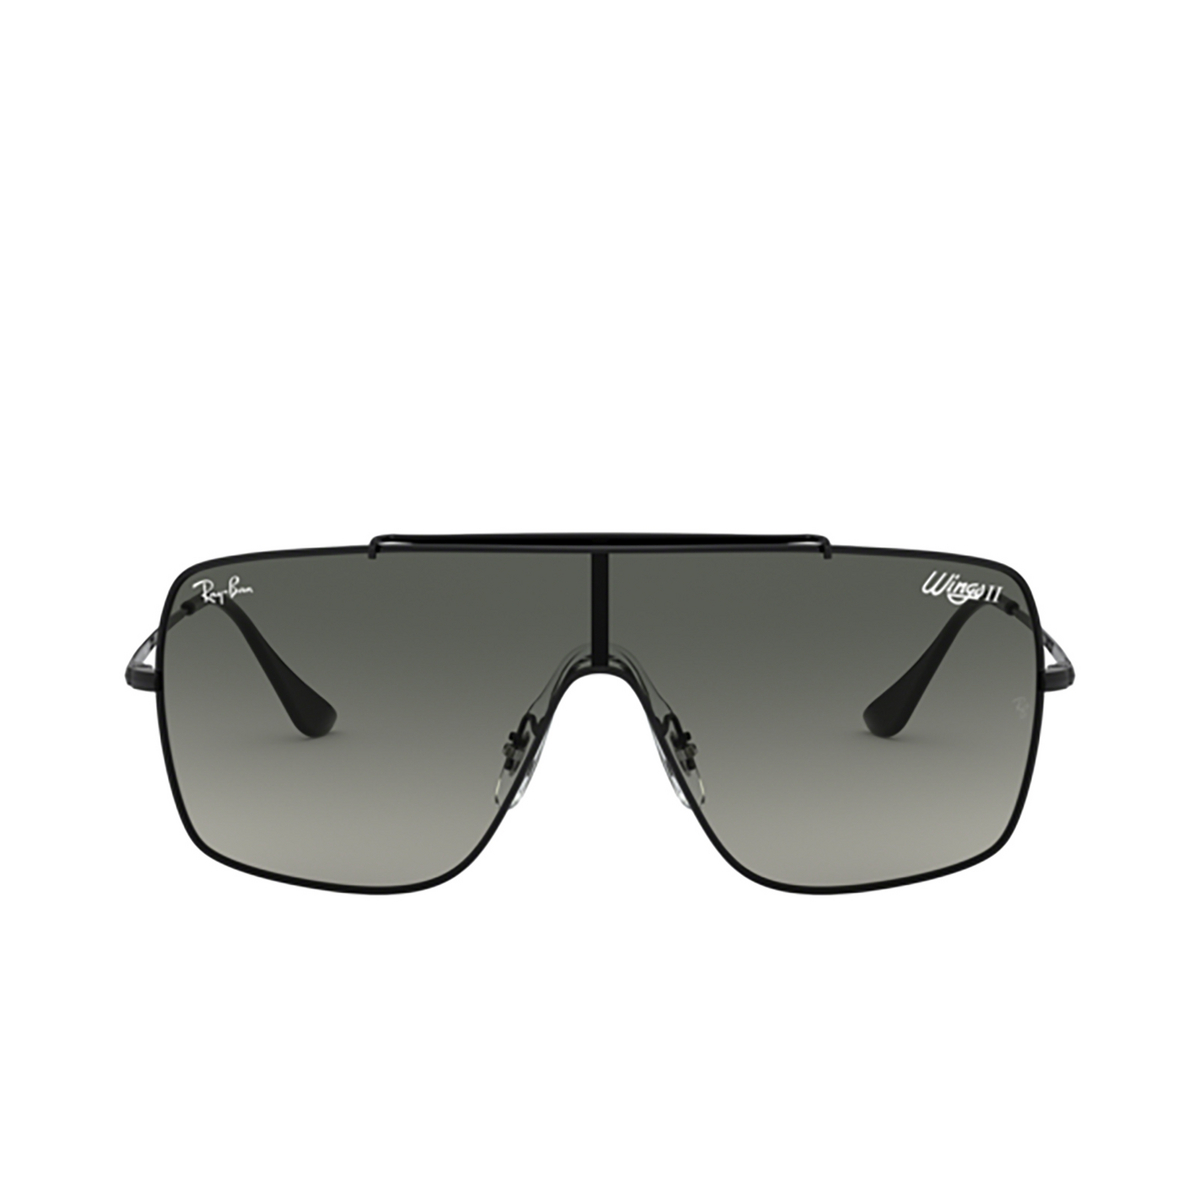 Ray-Ban WINGS II Sunglasses 002/11 BLACK - front view